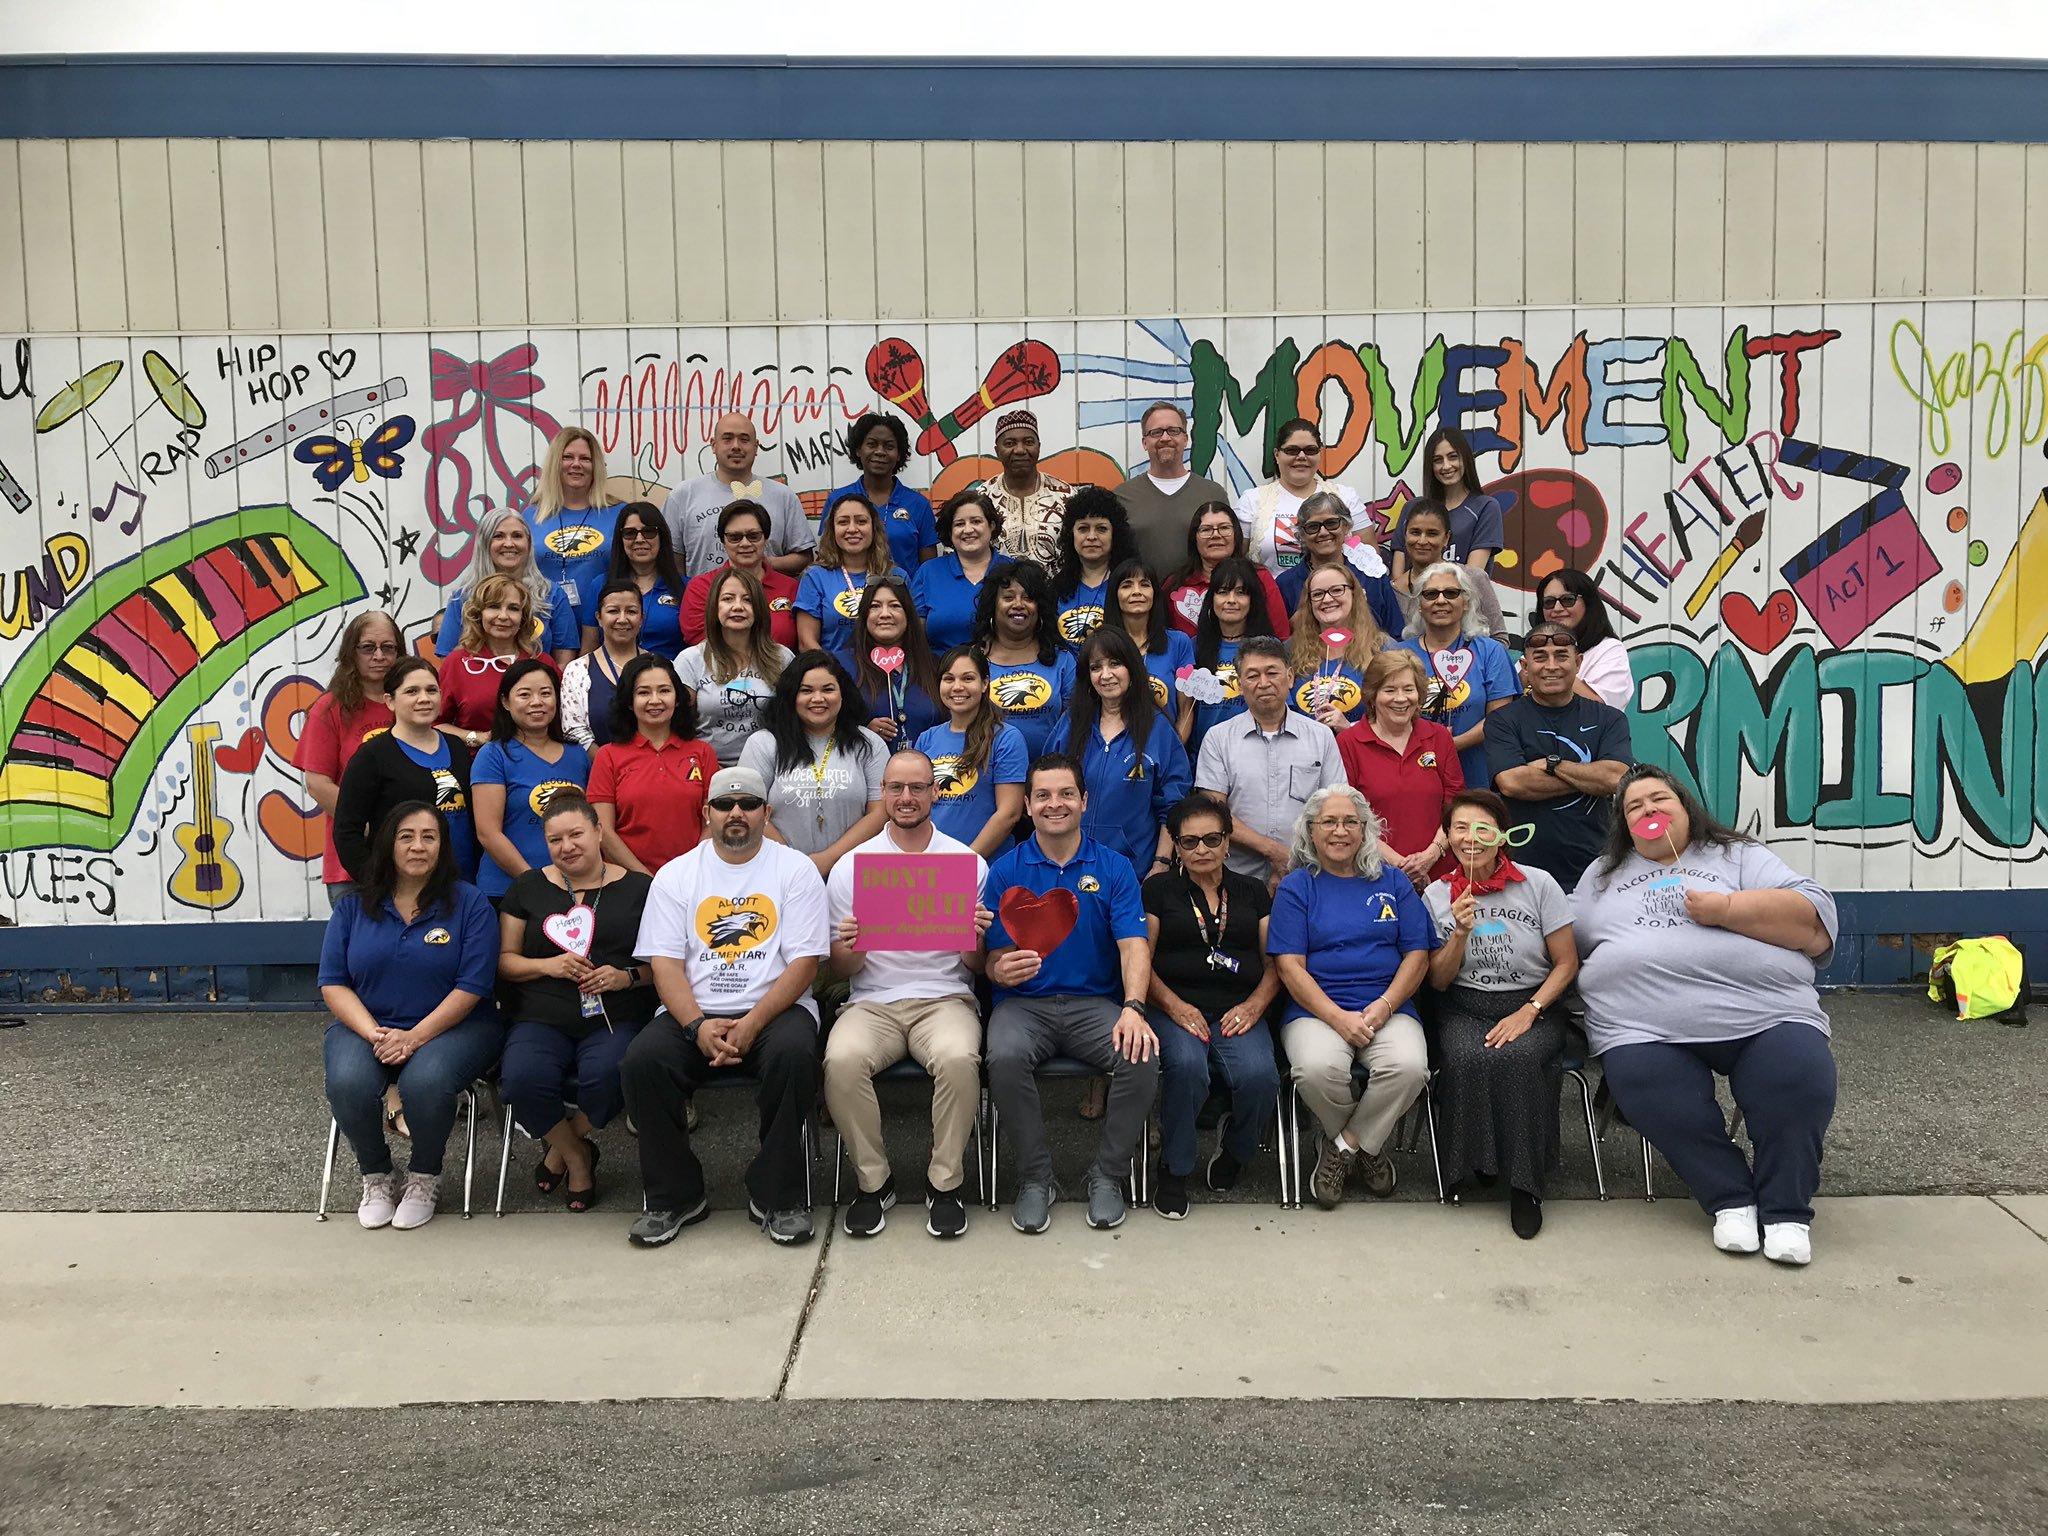 Alcott Elementary staff would like to remind our #EagleFamily to SOAR and Don't Quit! #Proud2bePUSD #Unified #POMONA #TogetherAsONE #ALLmeansALL 